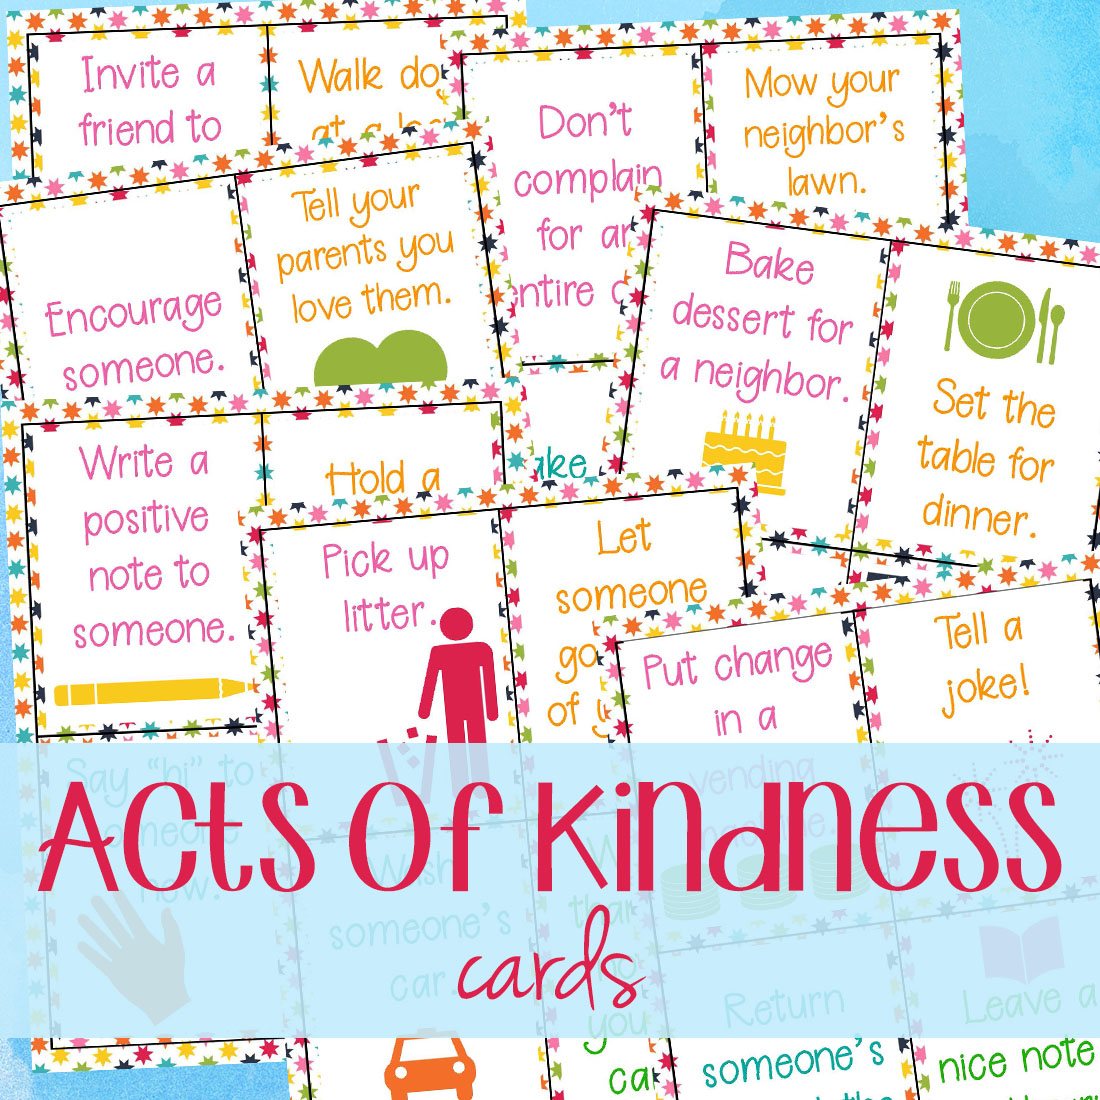 January Random Acts of Kindness Ideas Calendar, Random Acts of Kindness Calendar for January, Acts of Kindness, This January Random Acts of Kindness Calendar is a perfect way to start the new year. promote kindness with these Random acts of kindness examples, This Monthly acts of kindness calendar is full of fun ideas 